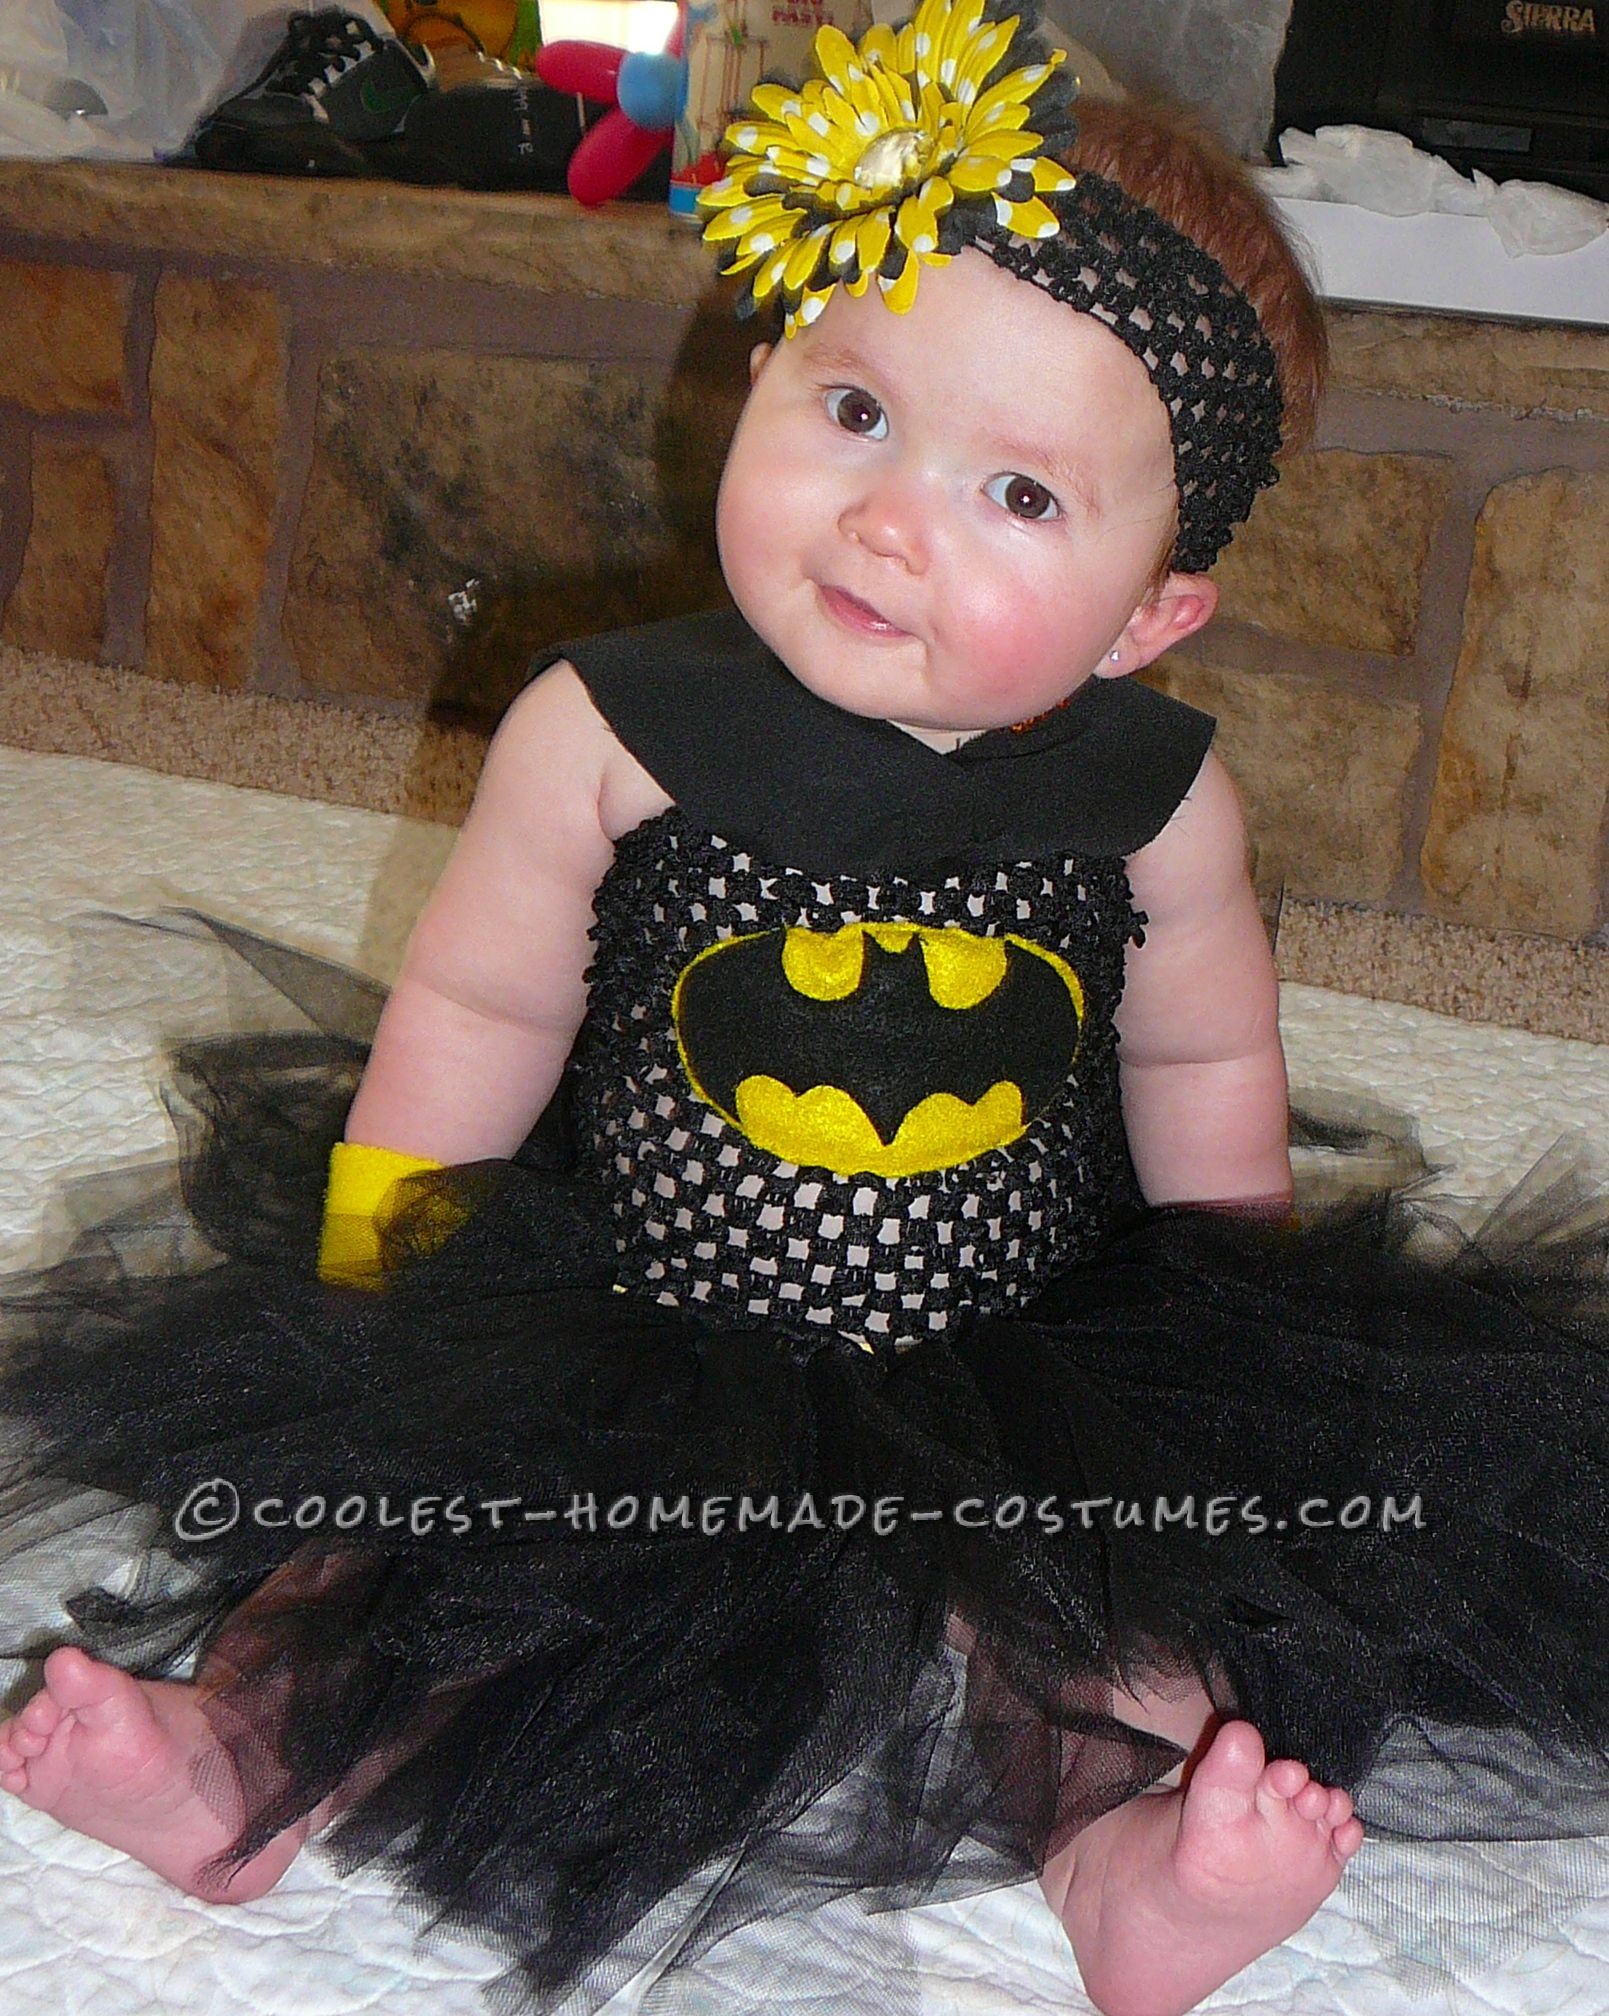 Pretty simple, just a black tutu dress. I made the bracelets from flannel, and the bat logo was made from felt and sewn on. I sewed on the bottom hal